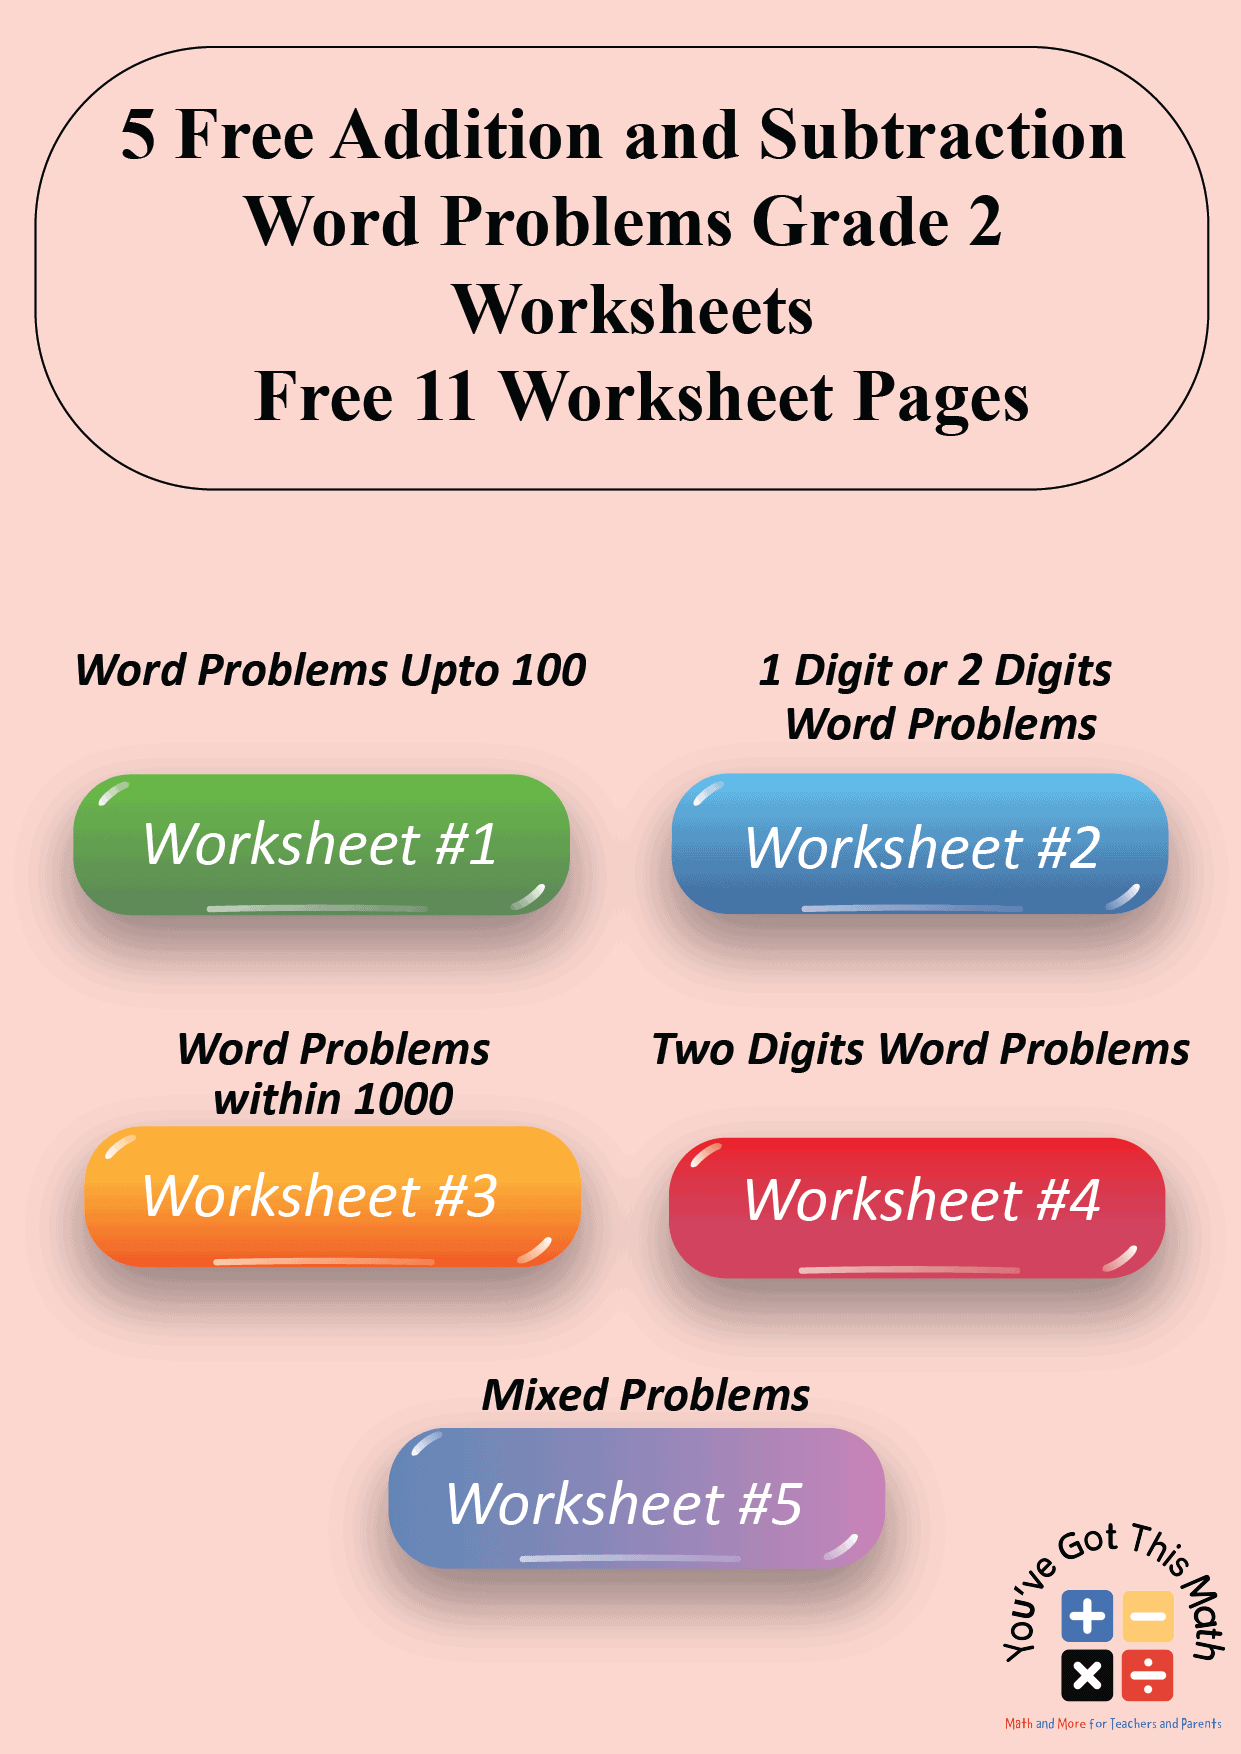 5-free-addition-and-subtraction-word-problems-grade-2-worksheets